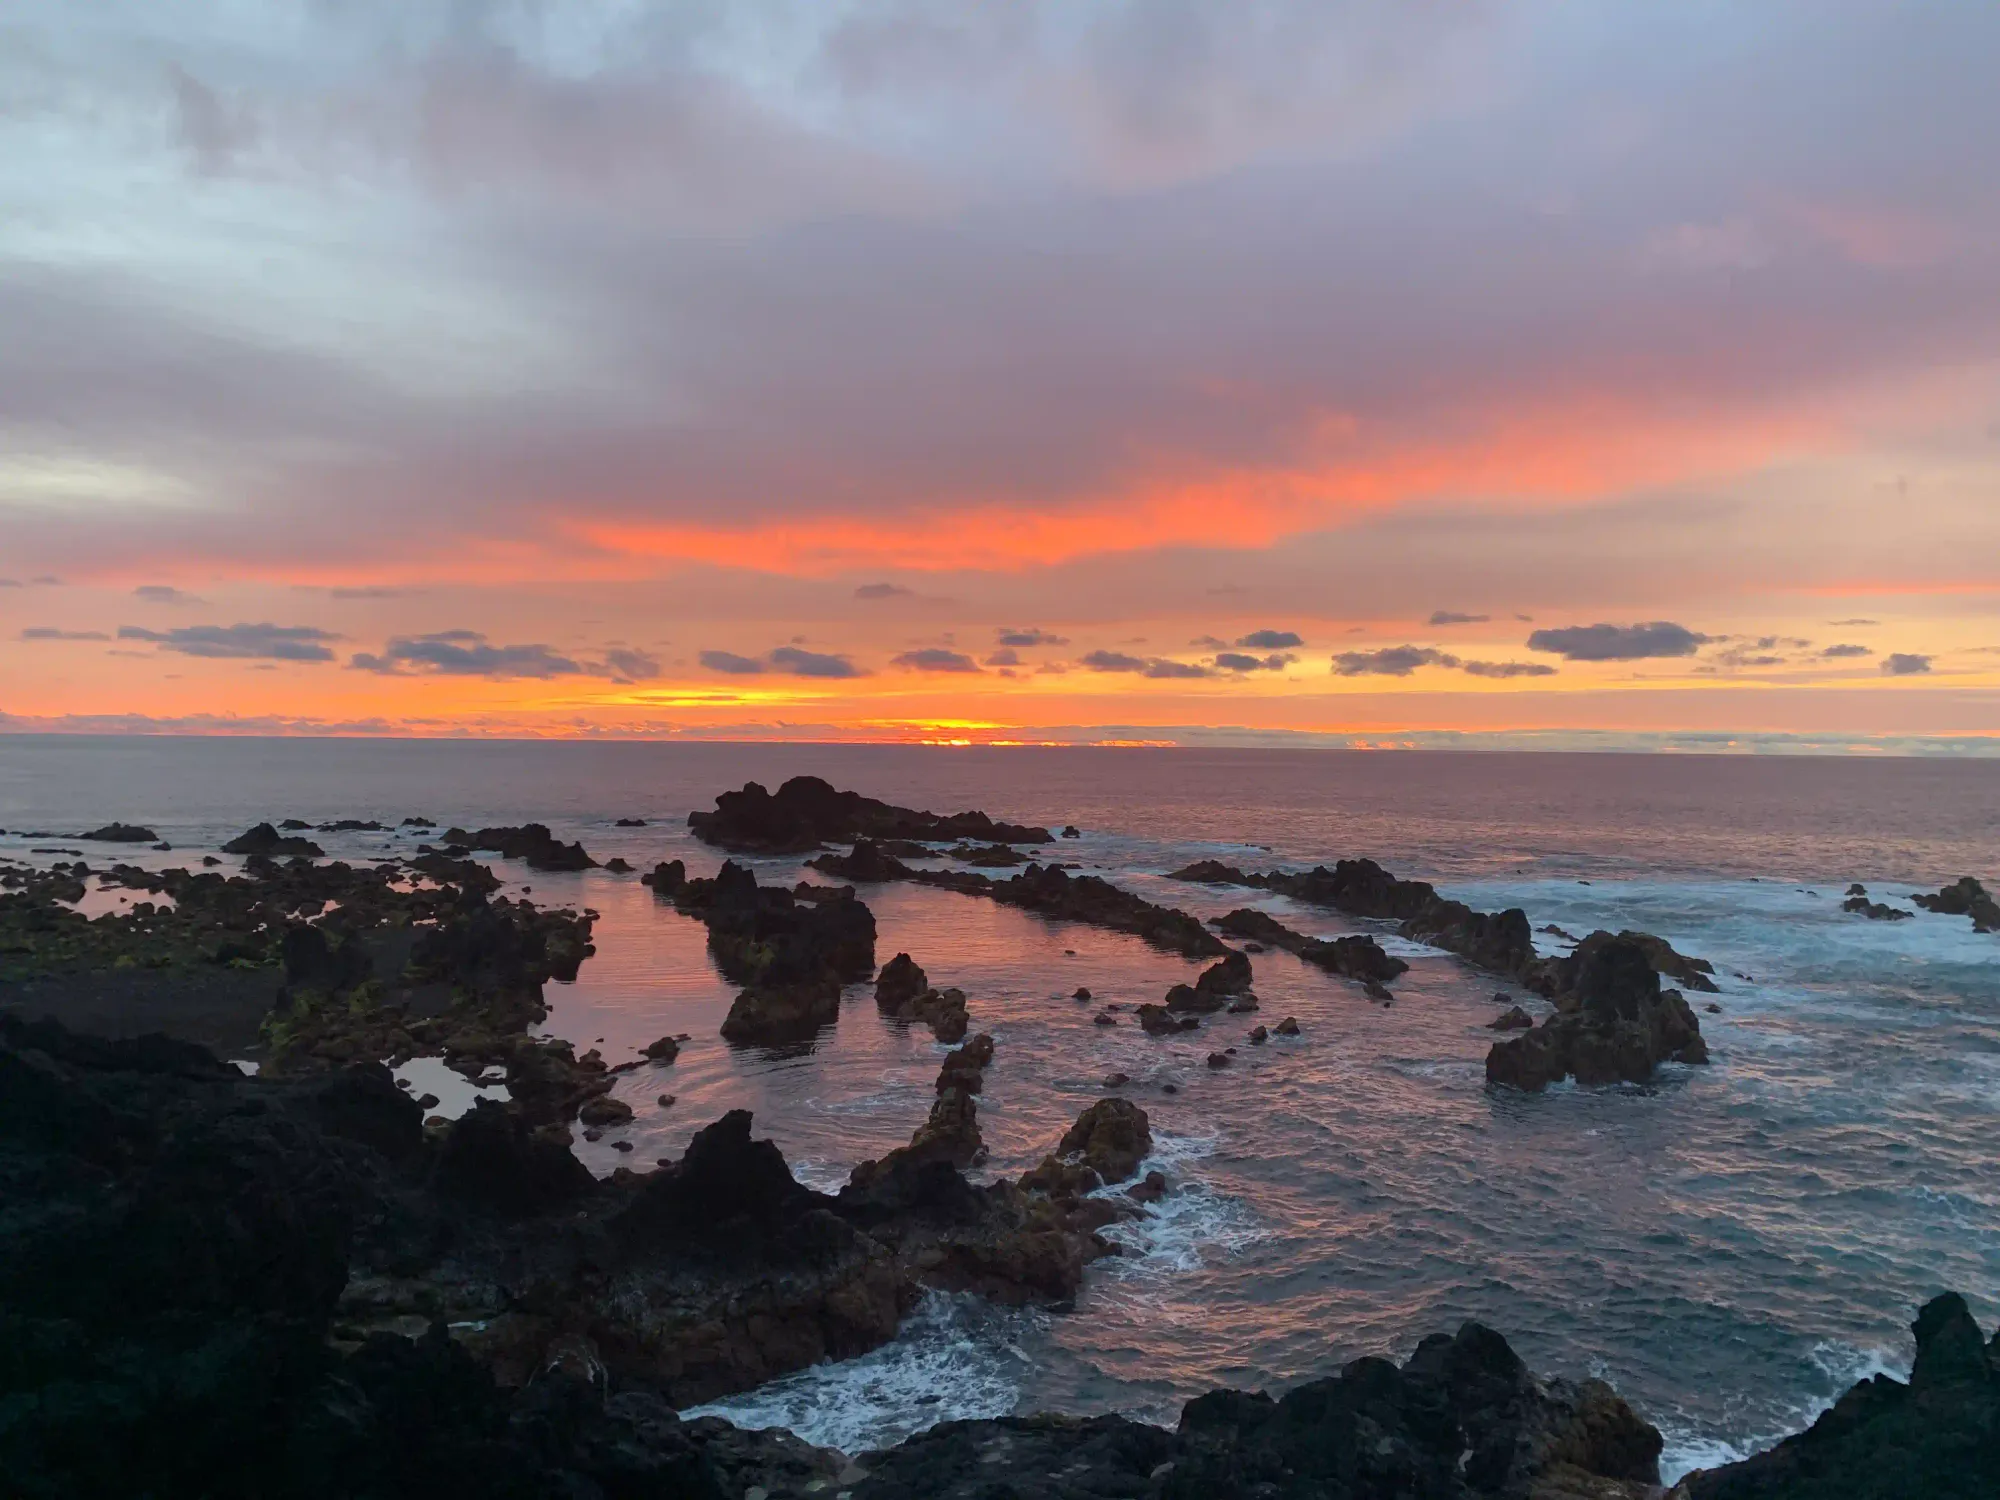 São Miguel, the Azores, at sunset